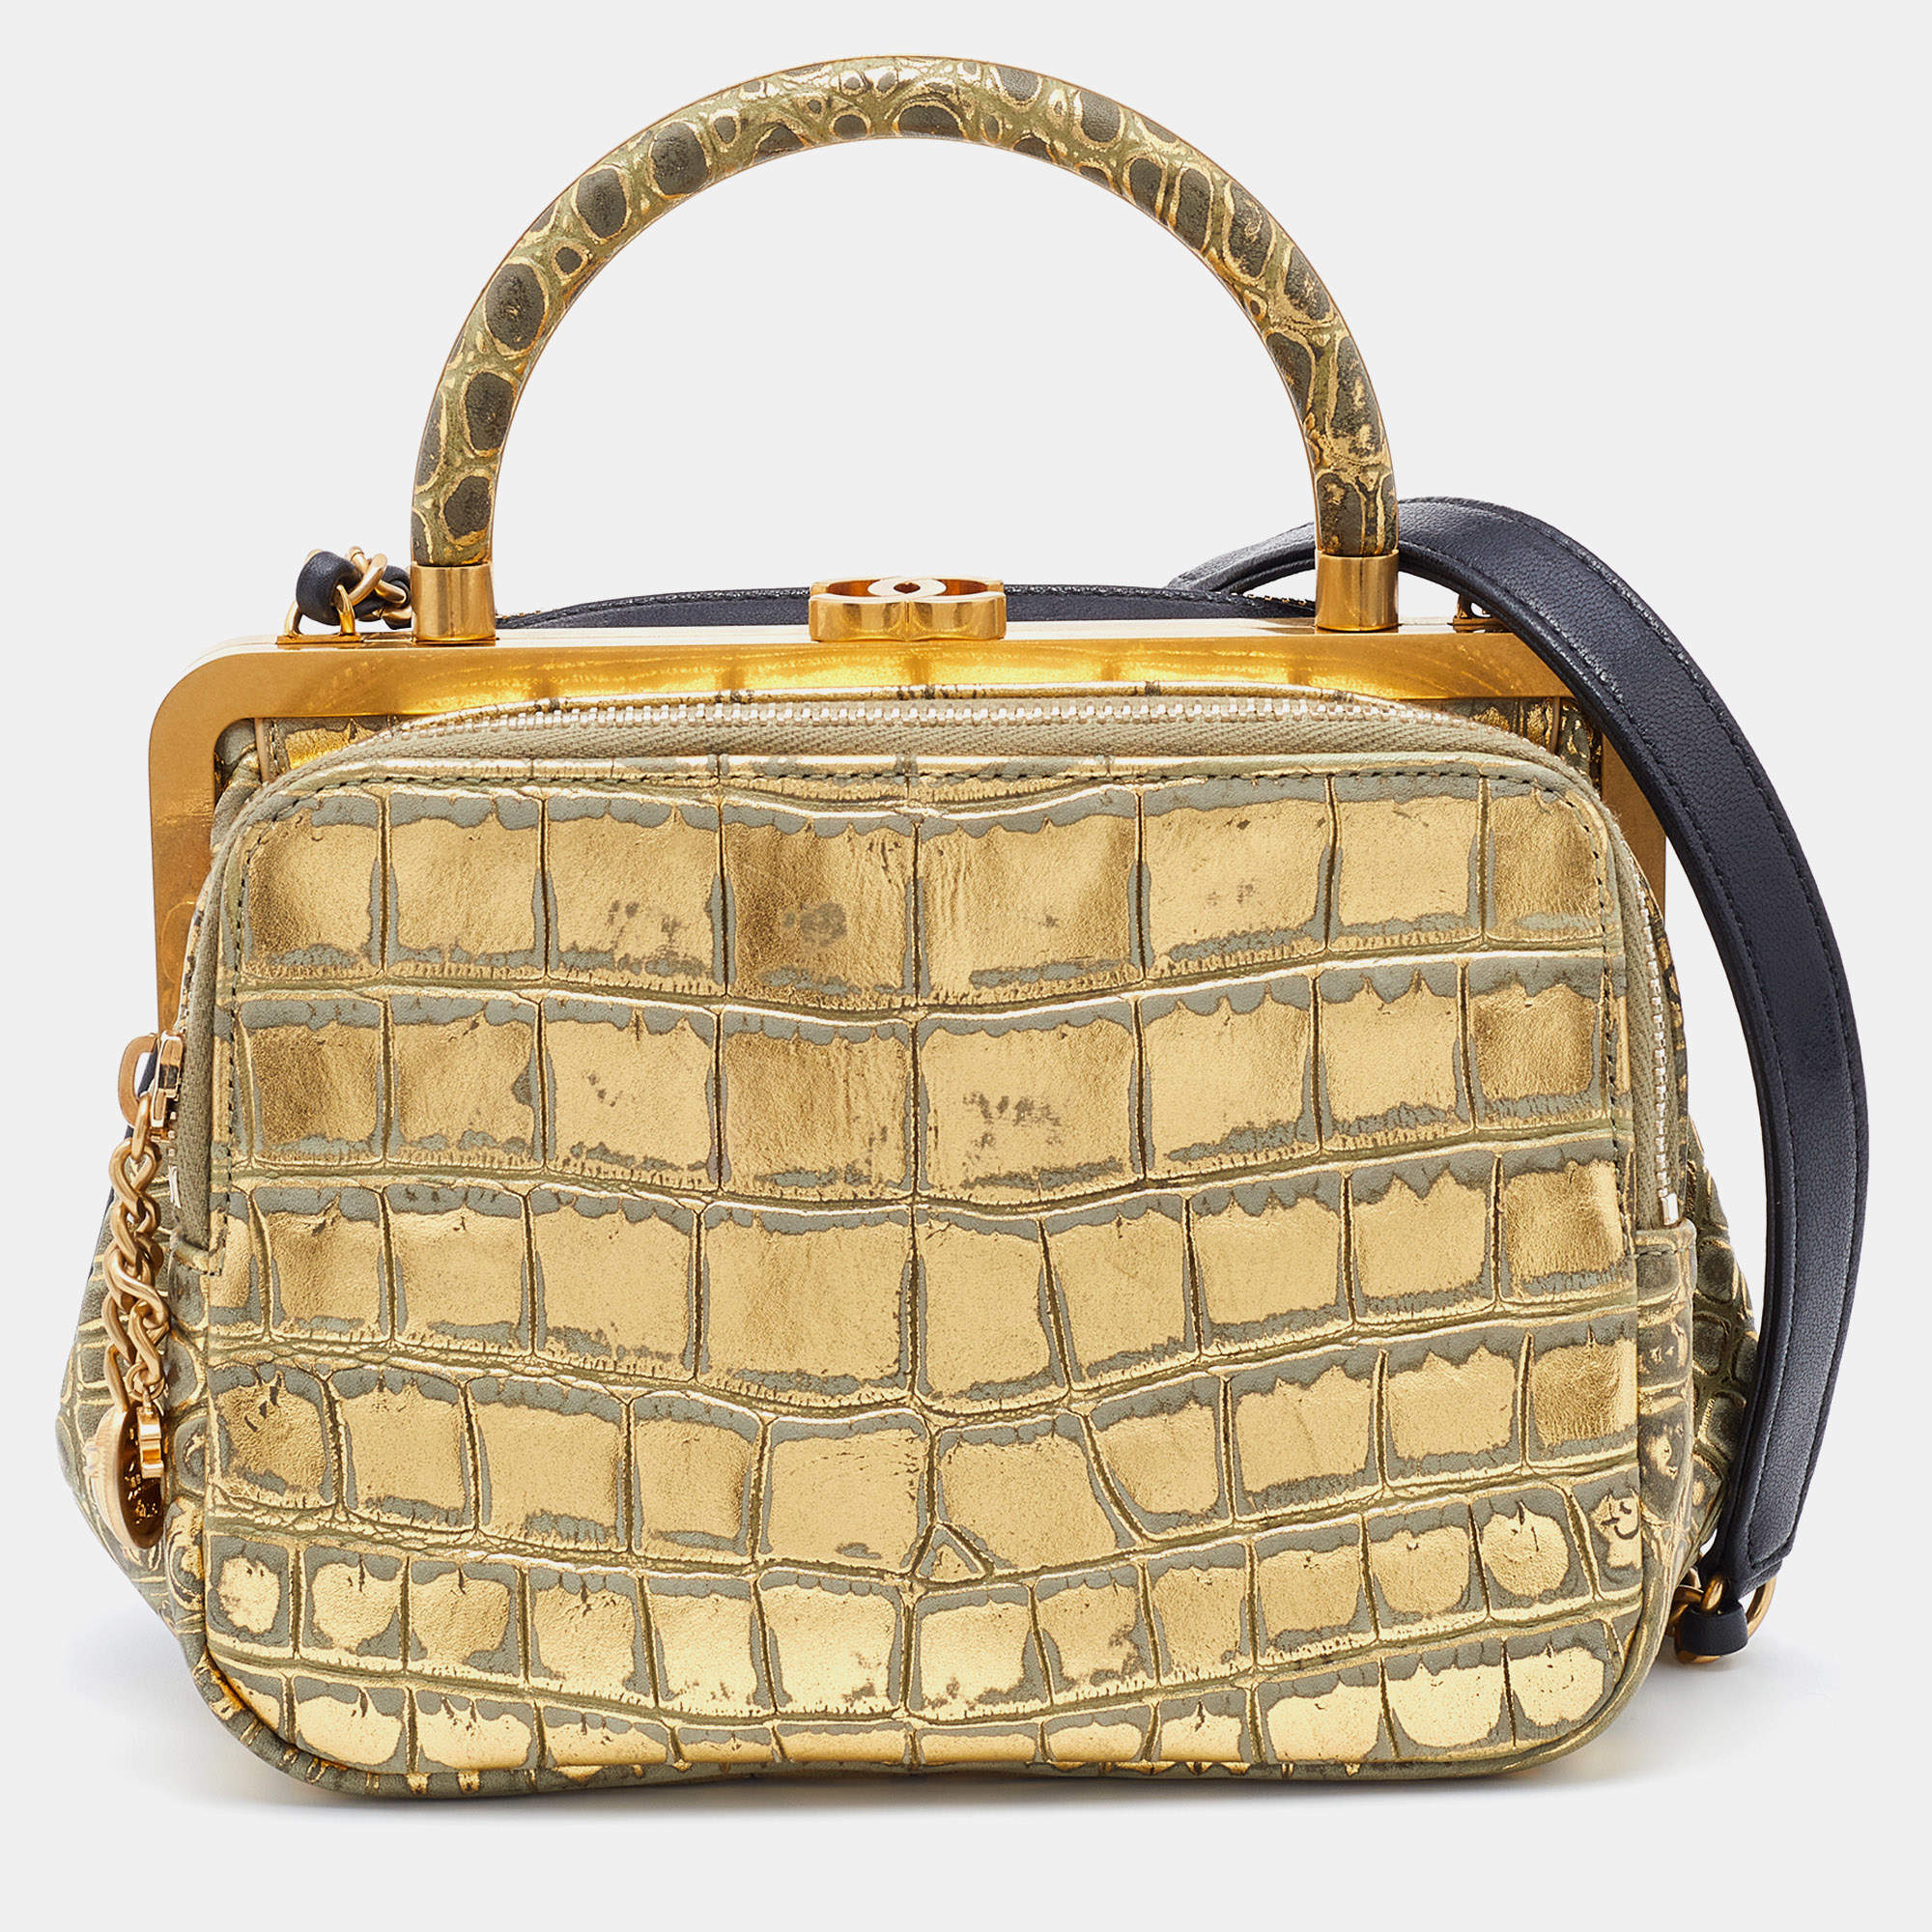 Chanel Black/Metallic Leather and Croc Embossed Small Kiss-lock Bag Chanel  | TLC